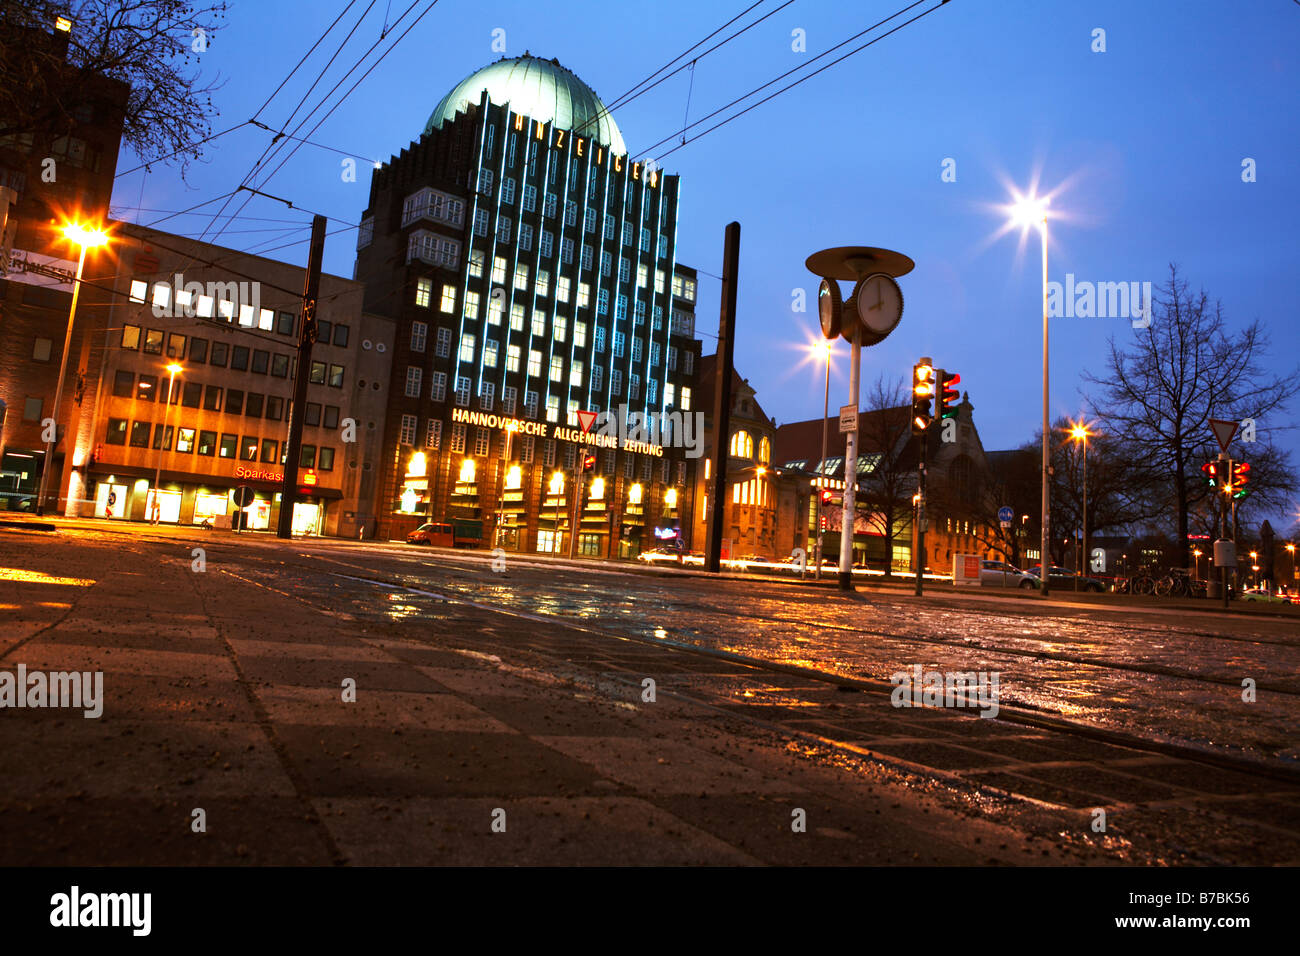 Anzeiger Hochhaus Building and tram station Steintor in Hanover at night. Stock Photo